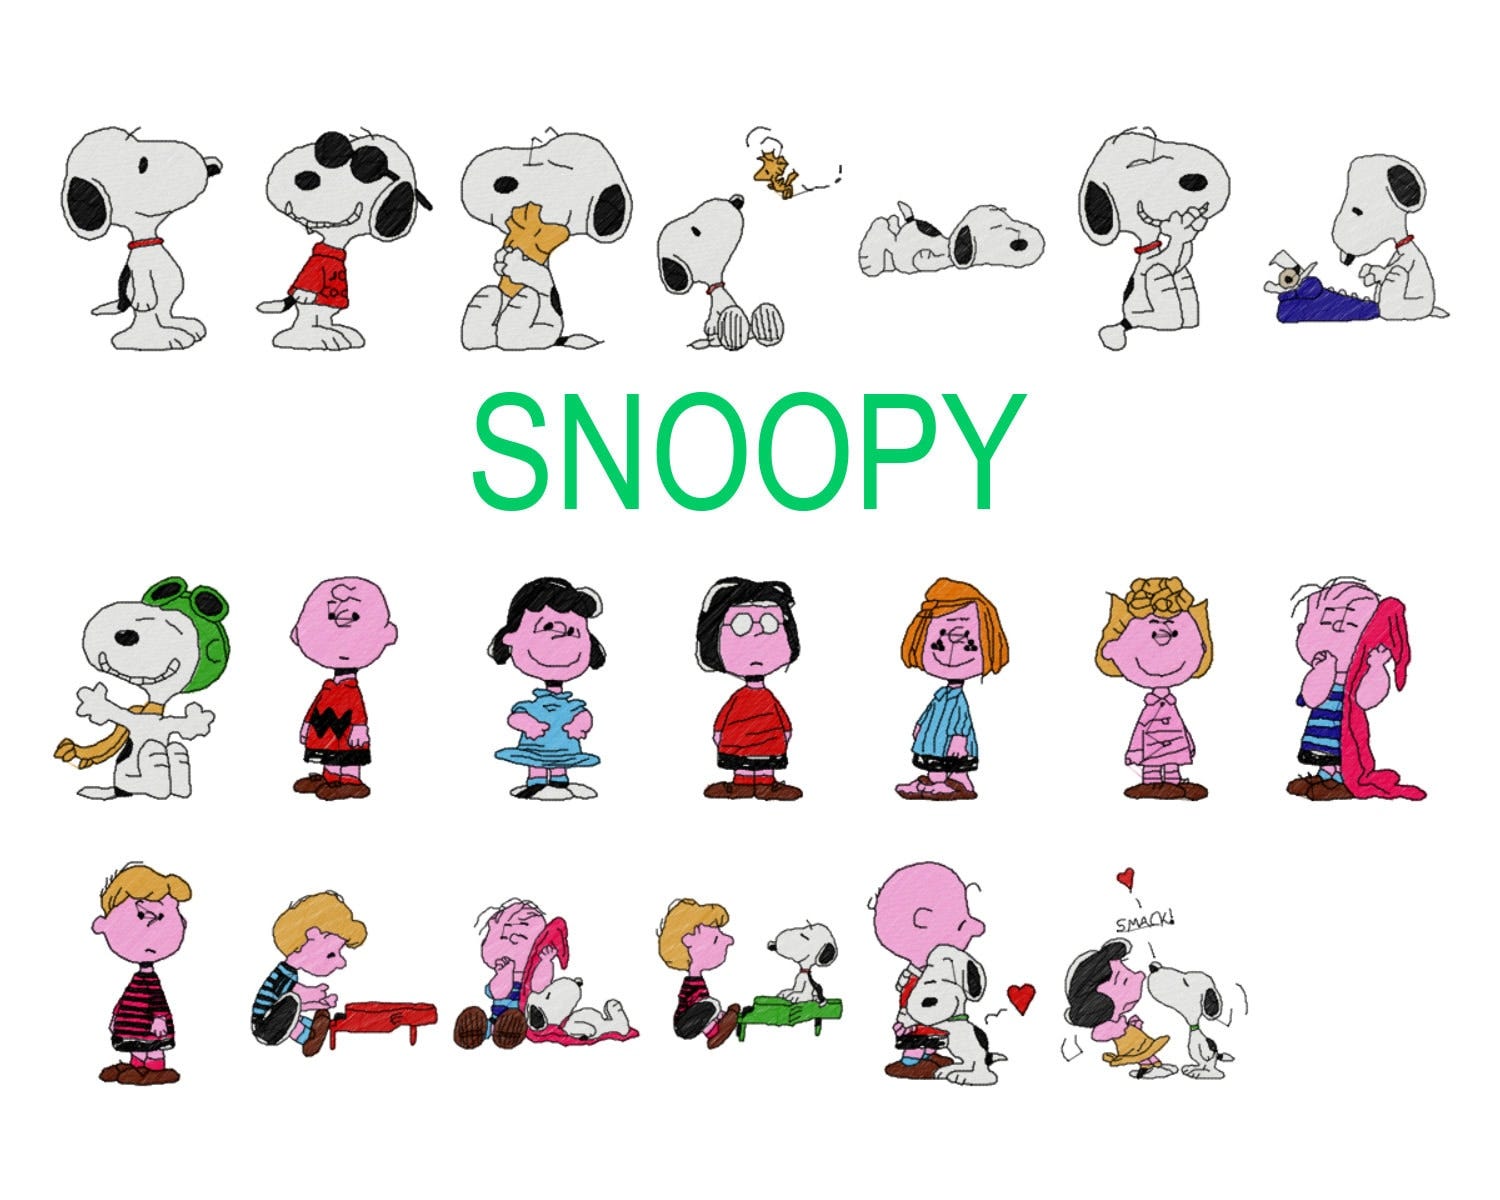 20 Snoopy machine embroidery designs, peanuts embroidery pattern, woodstock embroidery, charlie brown, linus marcie schroeder sally lucy